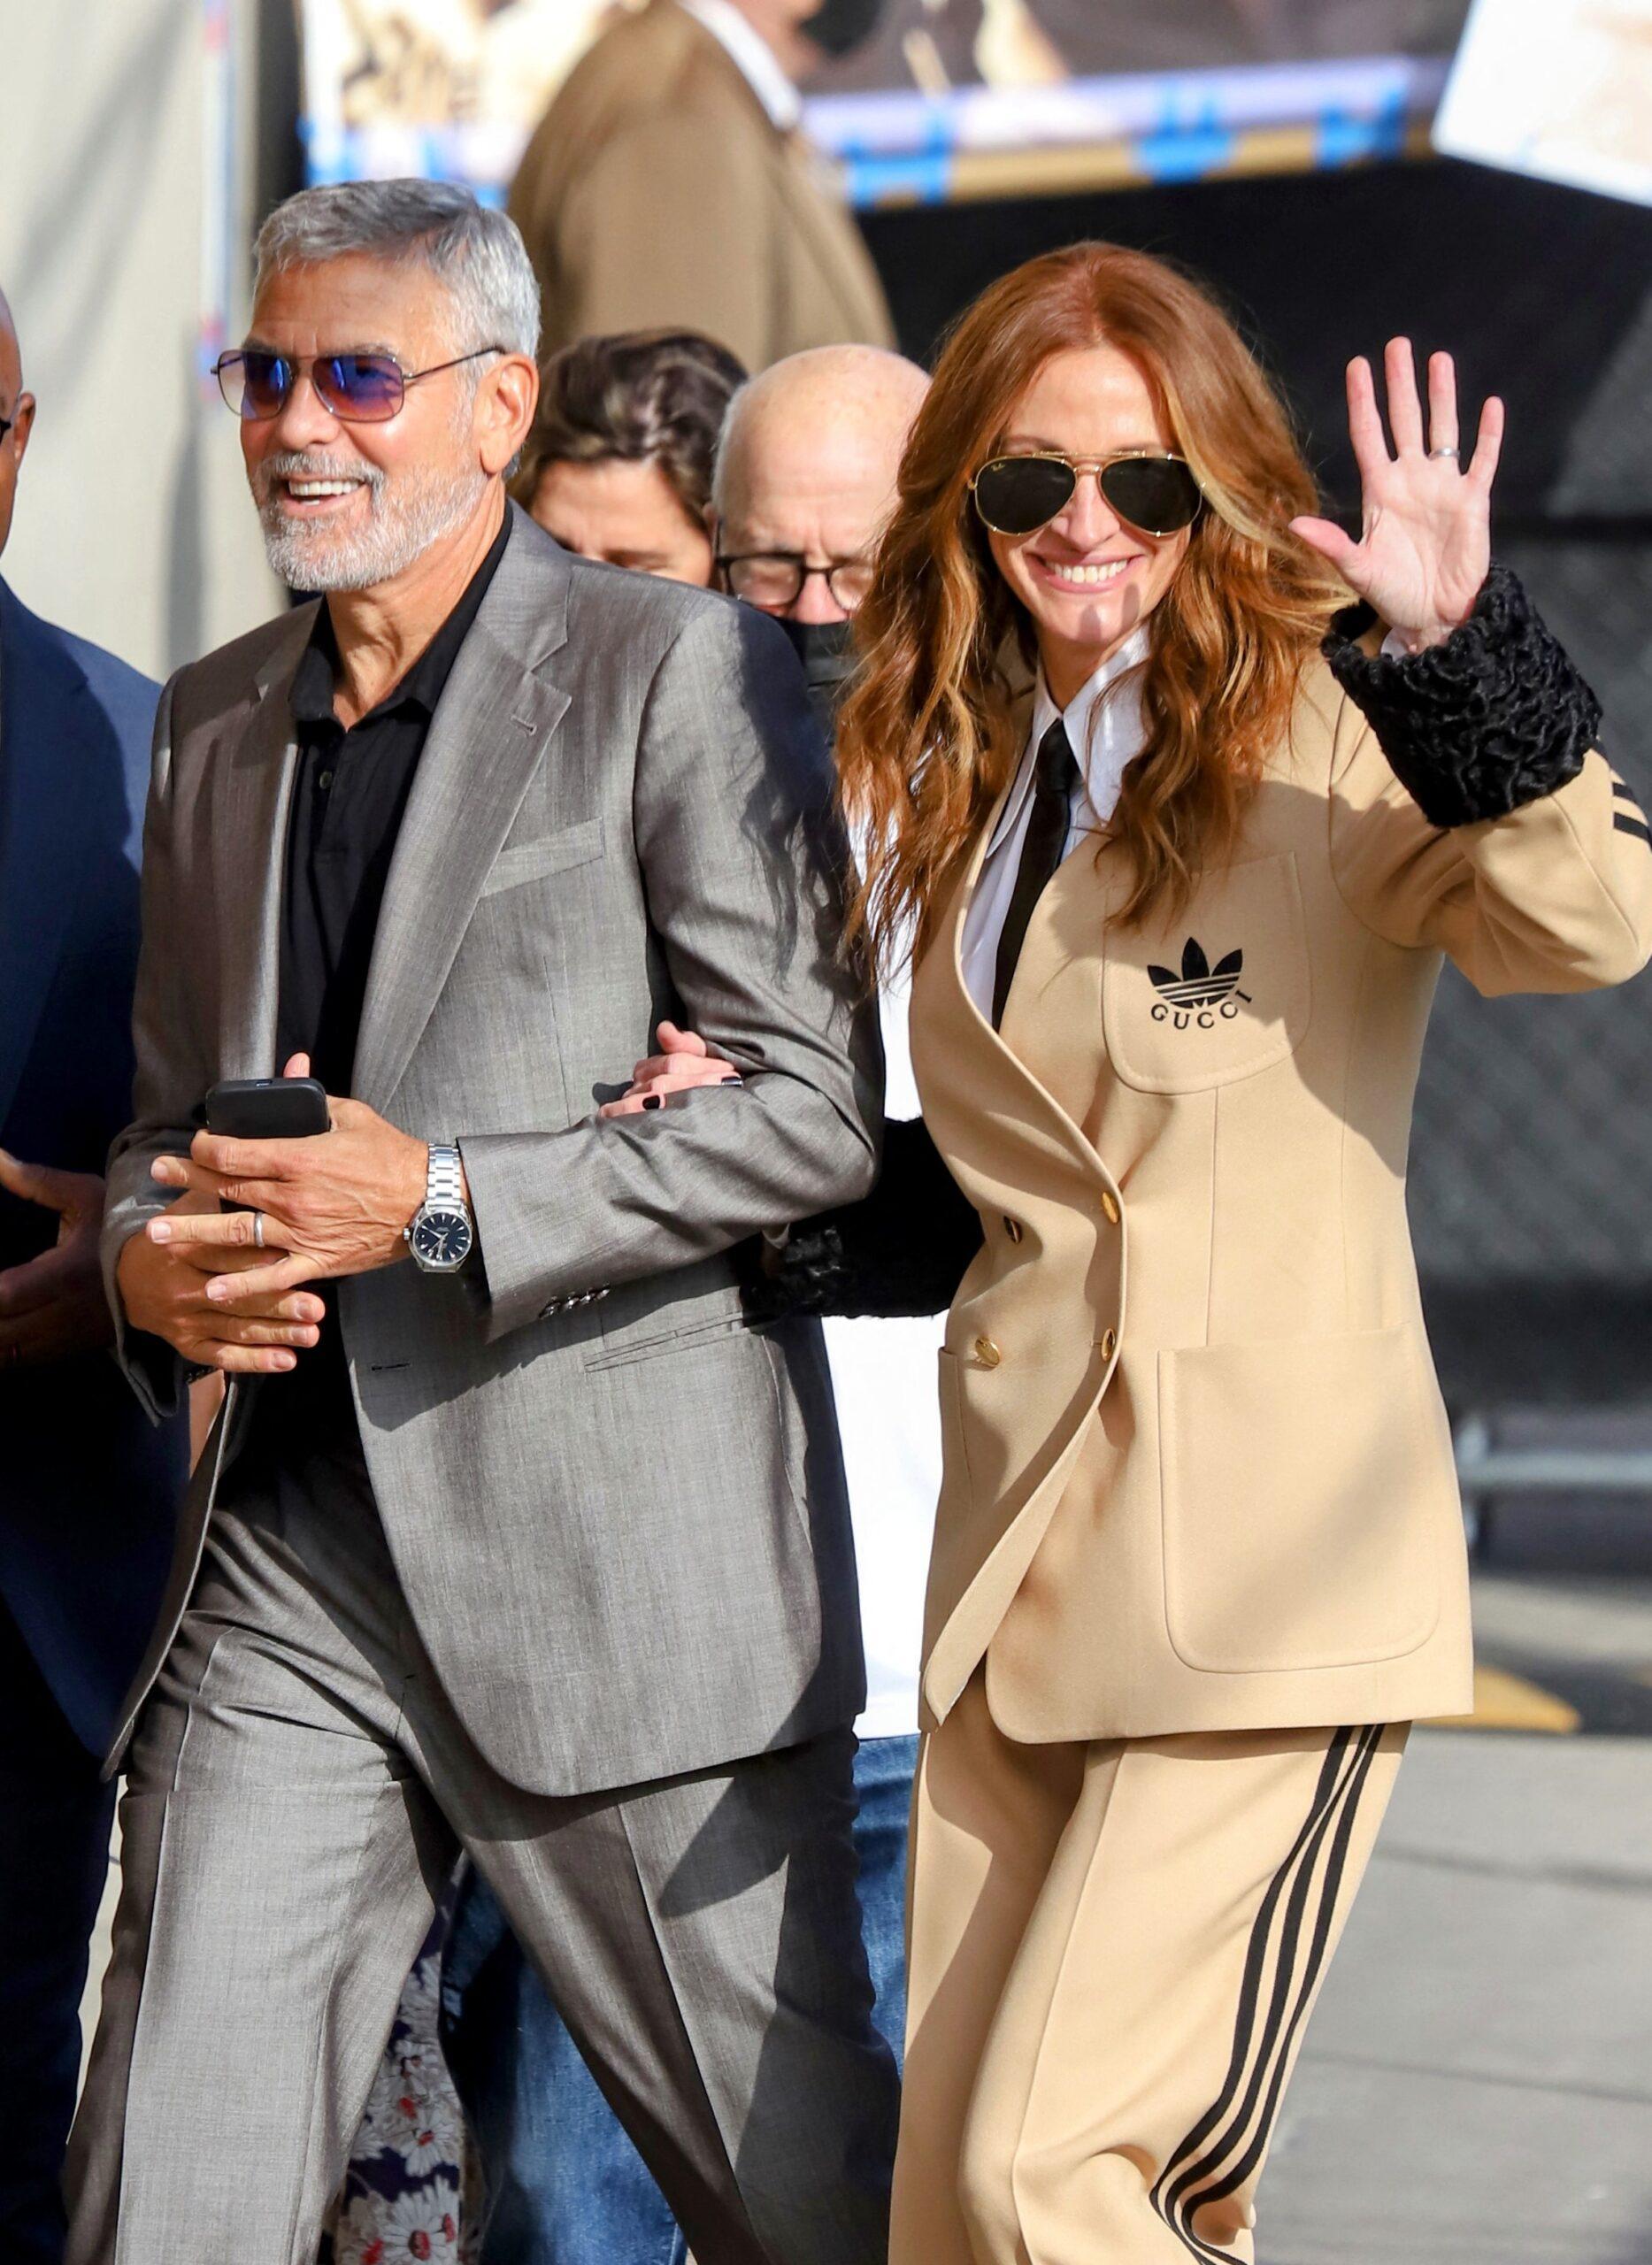 George Clooney and Julia Roberts in Adidas Gucci seen making an appearance arm in arm at Jimmy Kimmel show